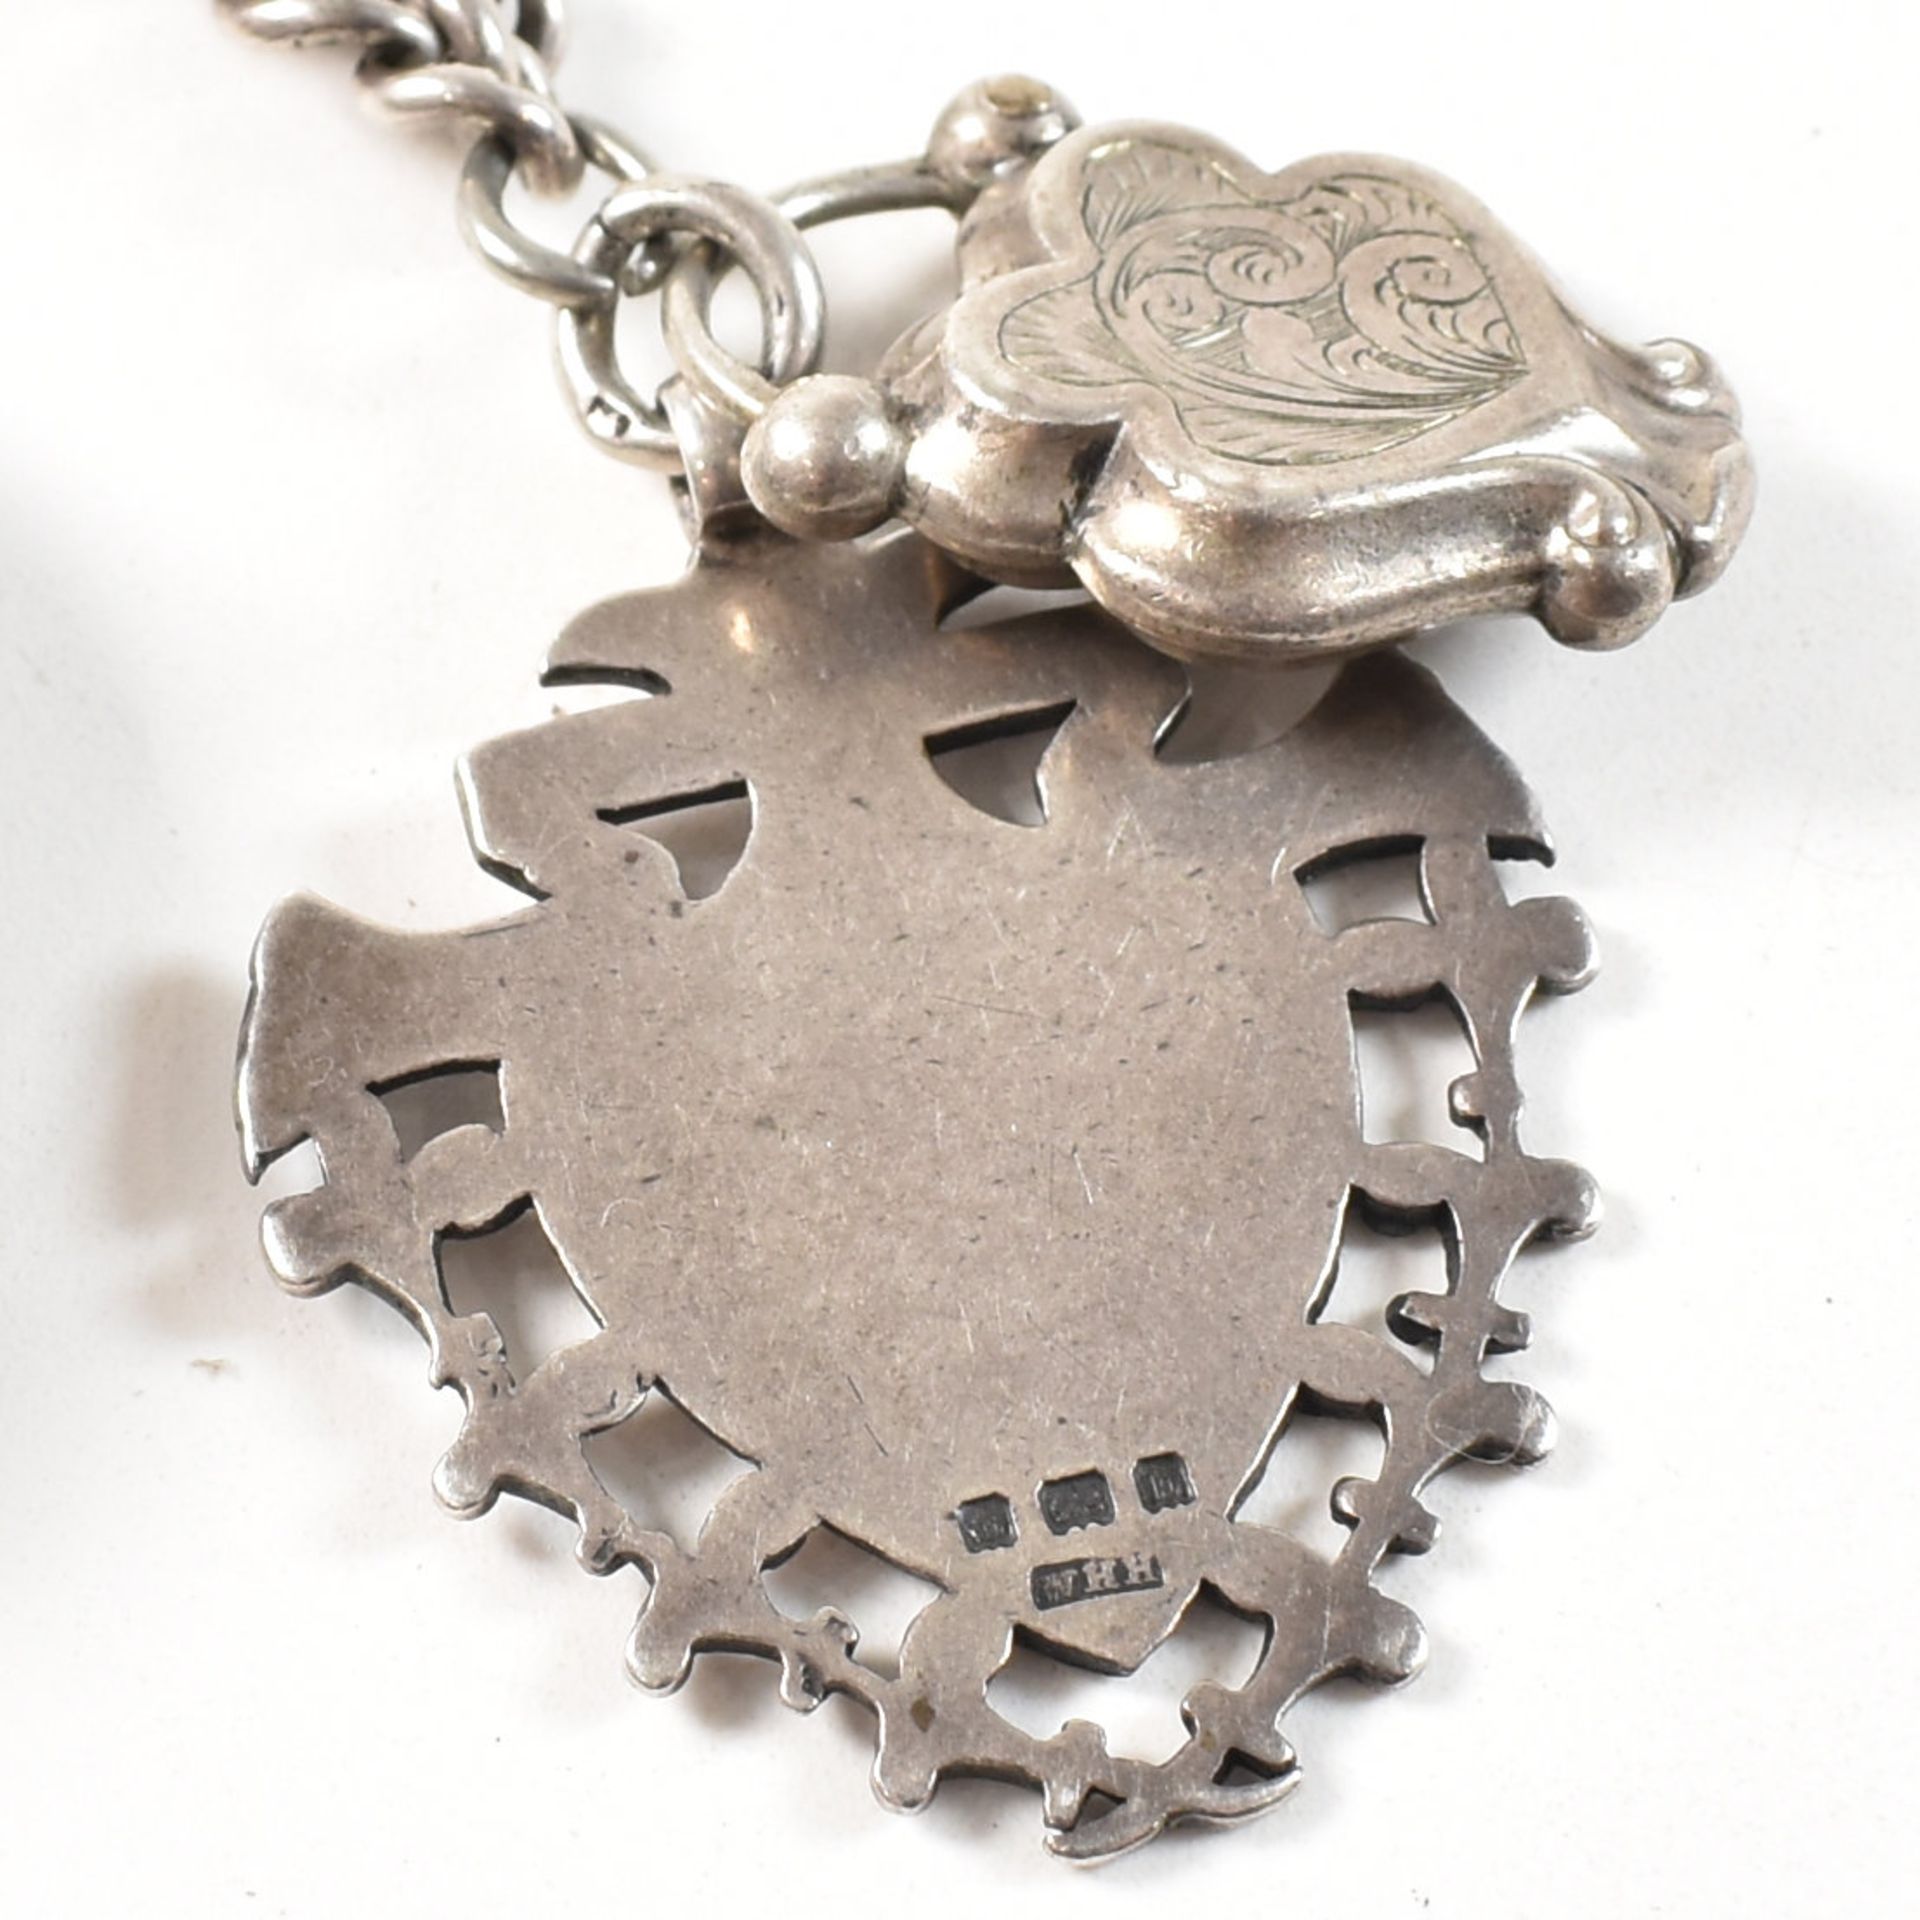 VICTORIAN SILVER POCKET WATCH ON CHAIN WITH KEY & FOBS - Image 4 of 5